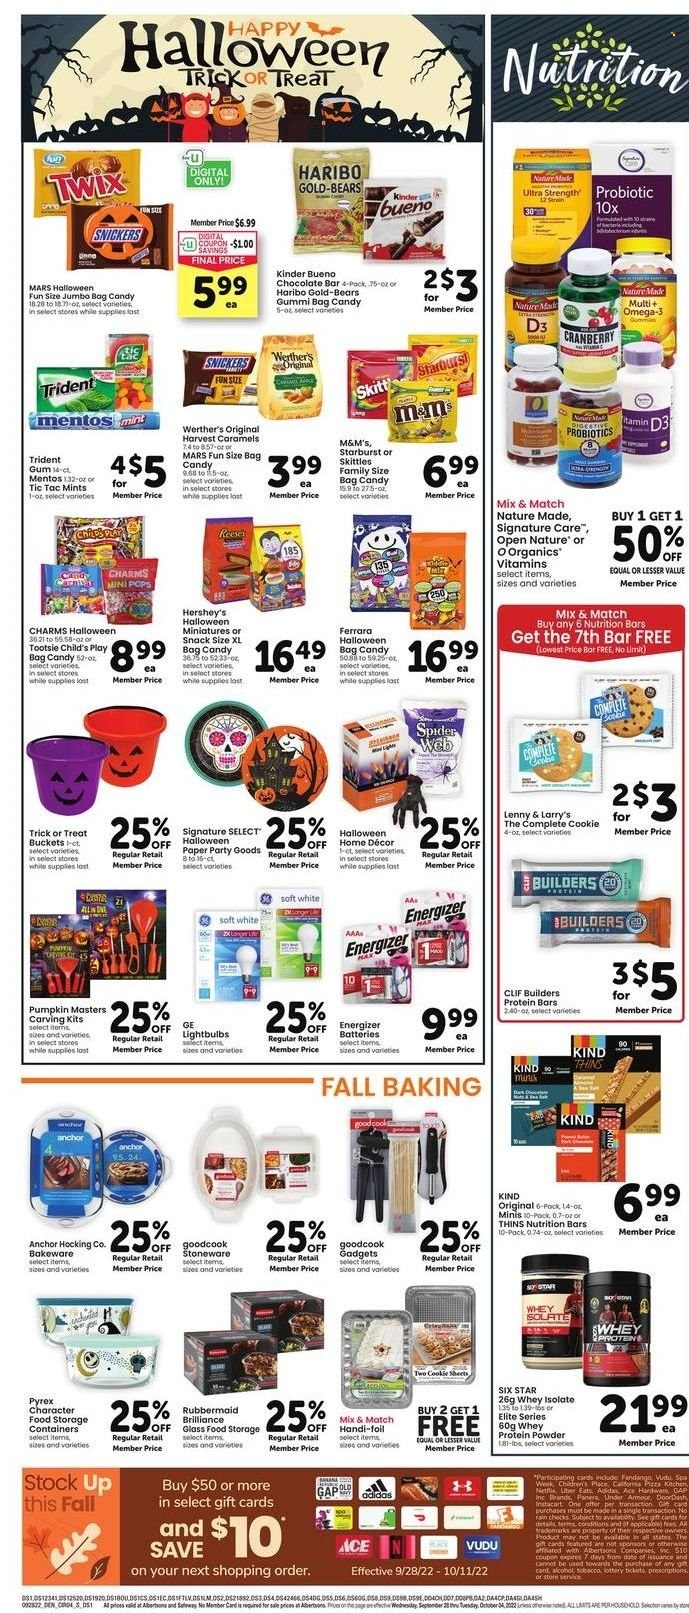 thumbnail - Safeway Flyer - 09/28/2022 - 10/04/2022 - Sales products - tart, Ace, pumpkin, pizza, Anchor, Reese's, Hershey's, Mentos, Haribo, Snickers, Twix, Mars, M&M's, Kinder Bueno, Digestive, 7 Days, Skittles, Tic Tac, Trident, Starburst, chocolate bar, chips, Thins, nutrition bar, protein bar, Adidas, bakeware, stoneware, Pyrex, storage box, paper, battery, Energizer, Halloween, Nature Made, probiotics, Omega-3, whey protein, vitamin D3. Page 4.